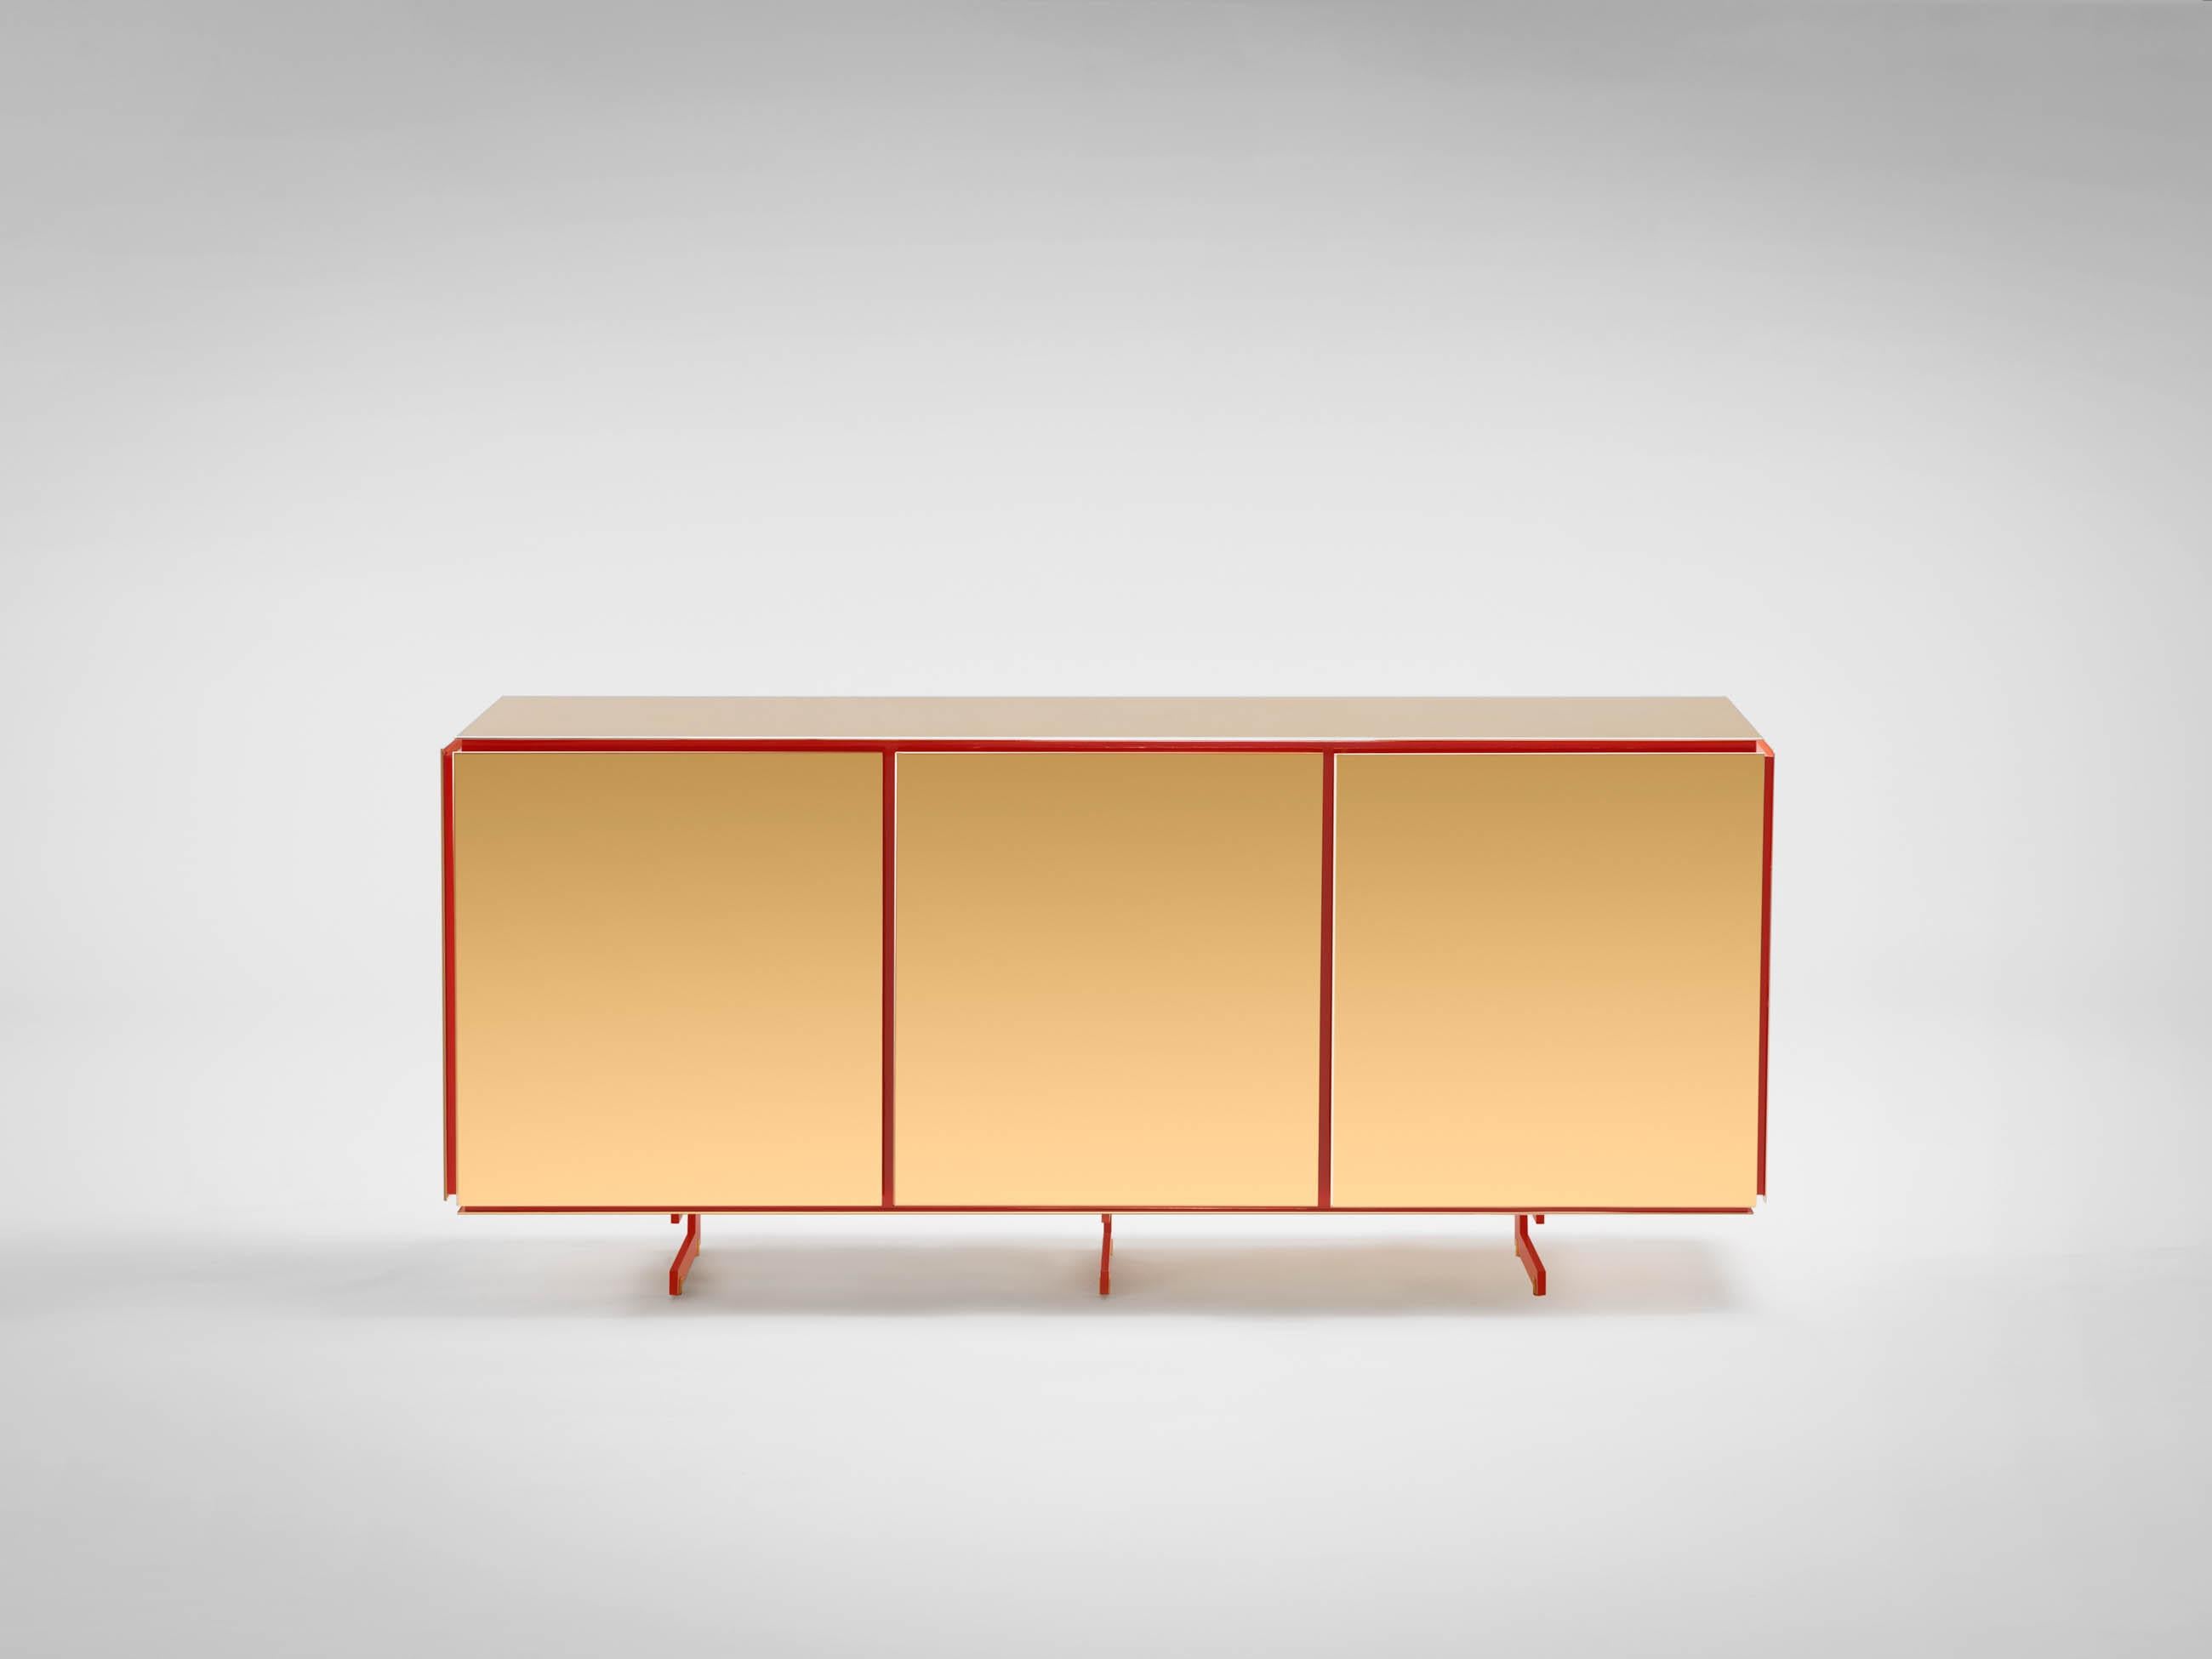 Gold large sideboard by SEM.
Dimensions: W 160 x D 42 x H 70 cm.
Materials: Polished or fine brushed 24kt yellow gold plated, Inlays in lacquered wood.

SEM is a new brand of home furnishings, designed and produced in Italy. The preview show at